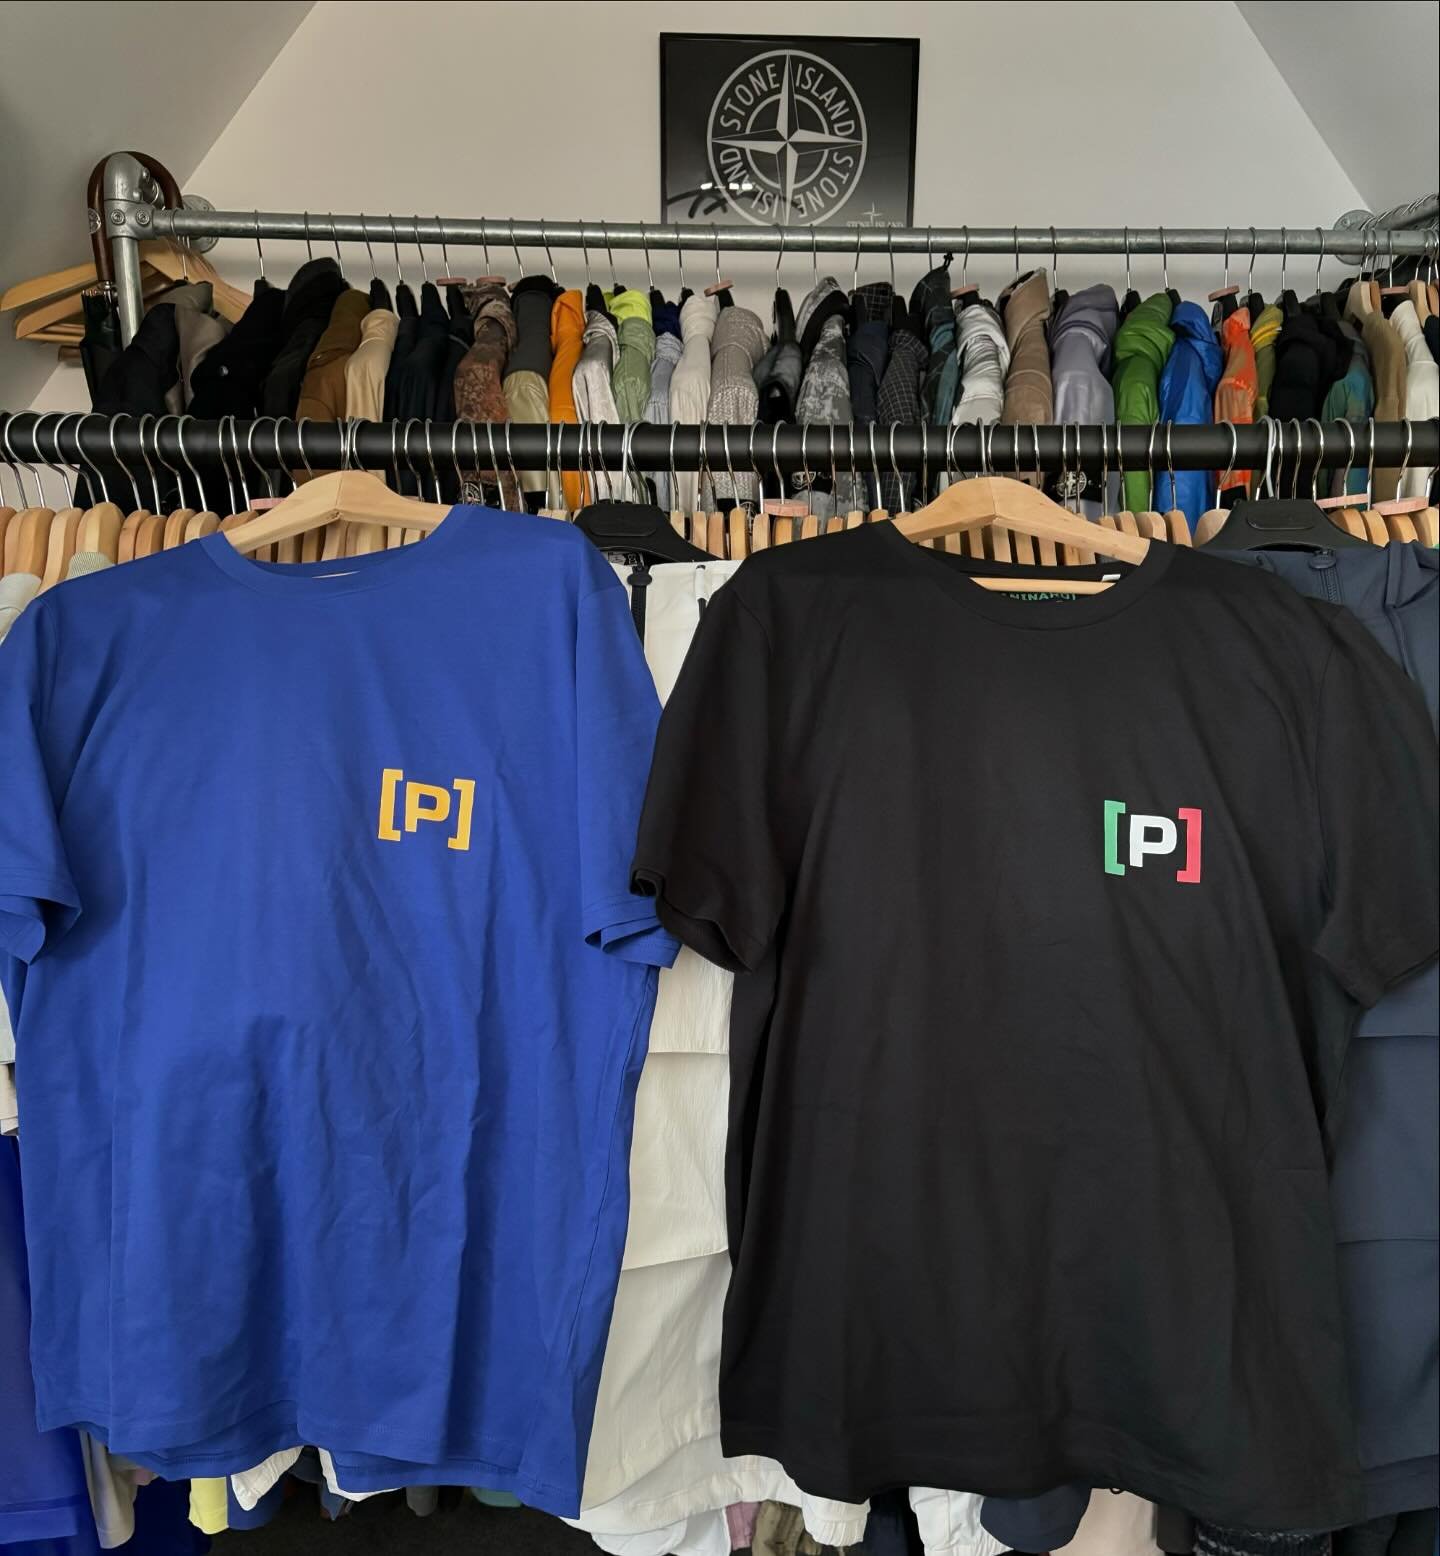 Thanks to the team at @paninaromag for my latest 2 T-shirts. Can&rsquo;t wait until the life saver jacket is launched. Keep your eyes out for updates on their page.
-
#paninaromag #stonedlove1982 #stoneisland #cpcompany #adidas #clobber #adidasspzl #